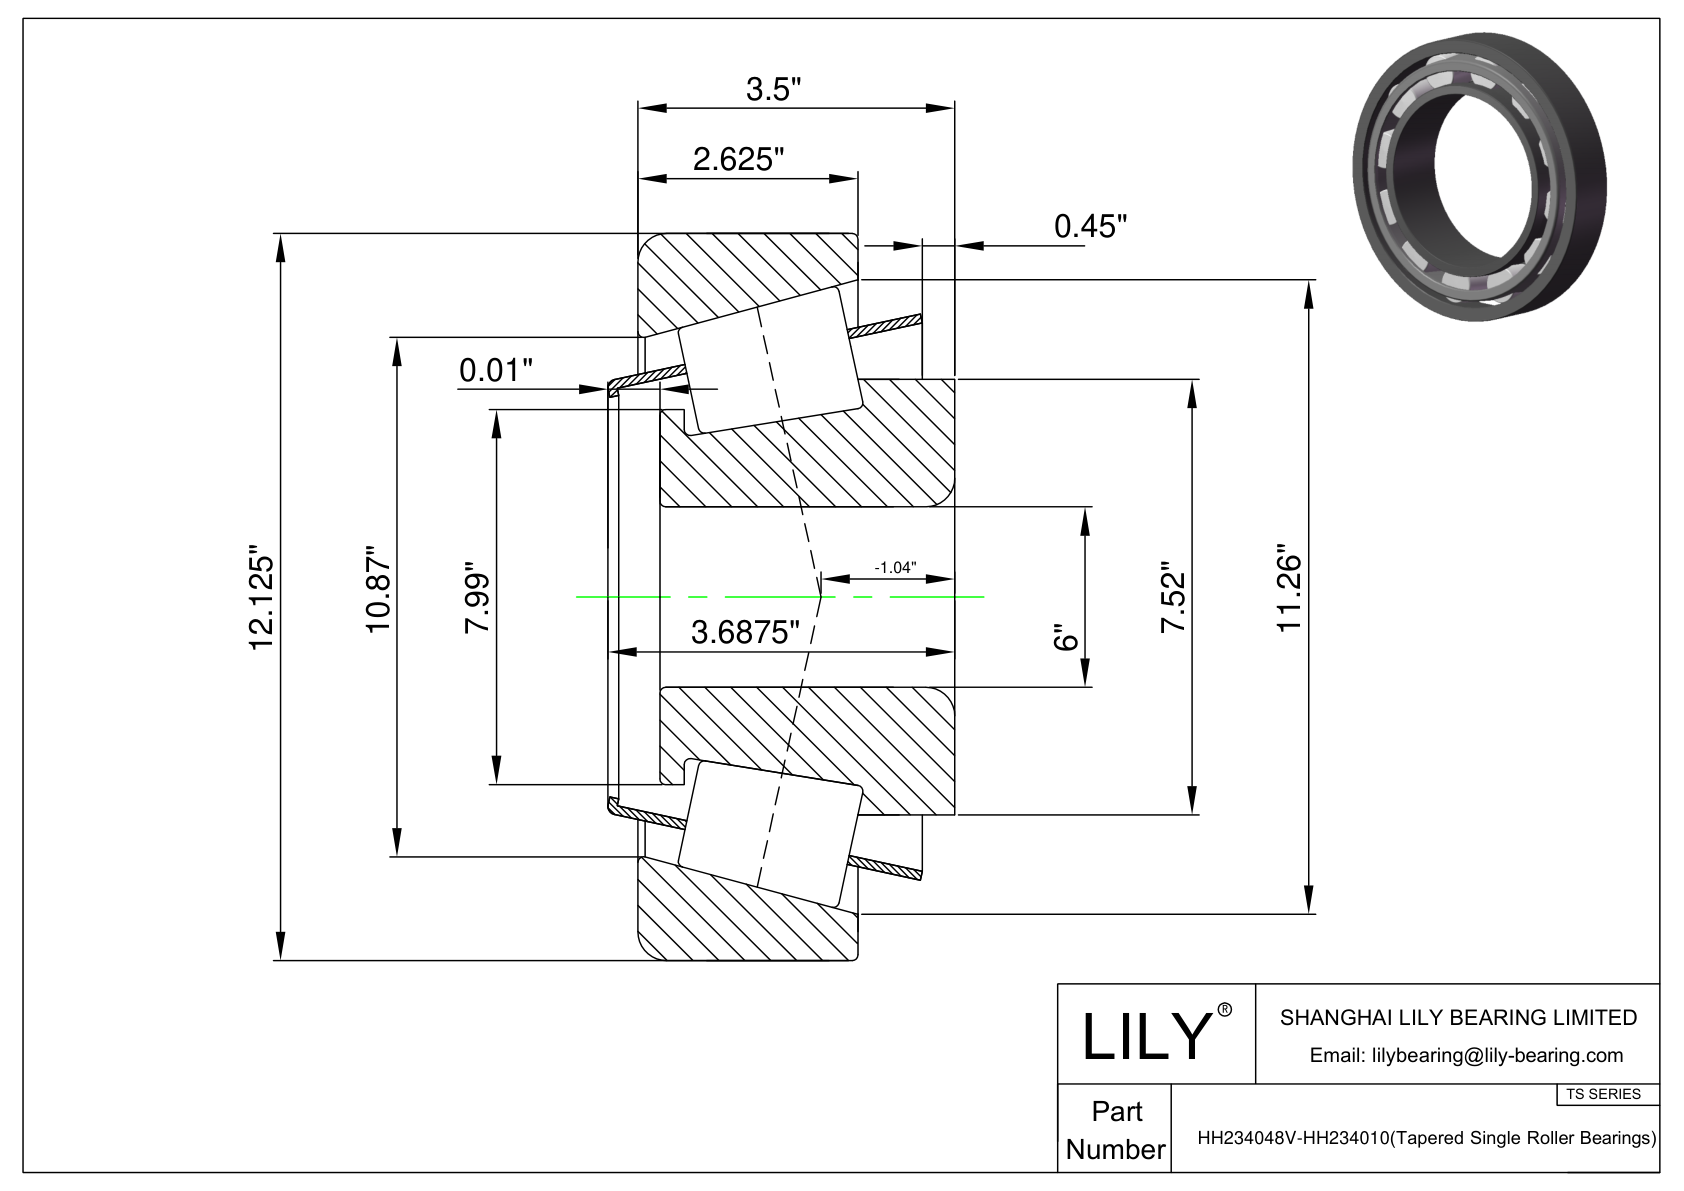 HH234048V-HH234010 TS (Tapered Single Roller Bearings) (Imperial) cad drawing